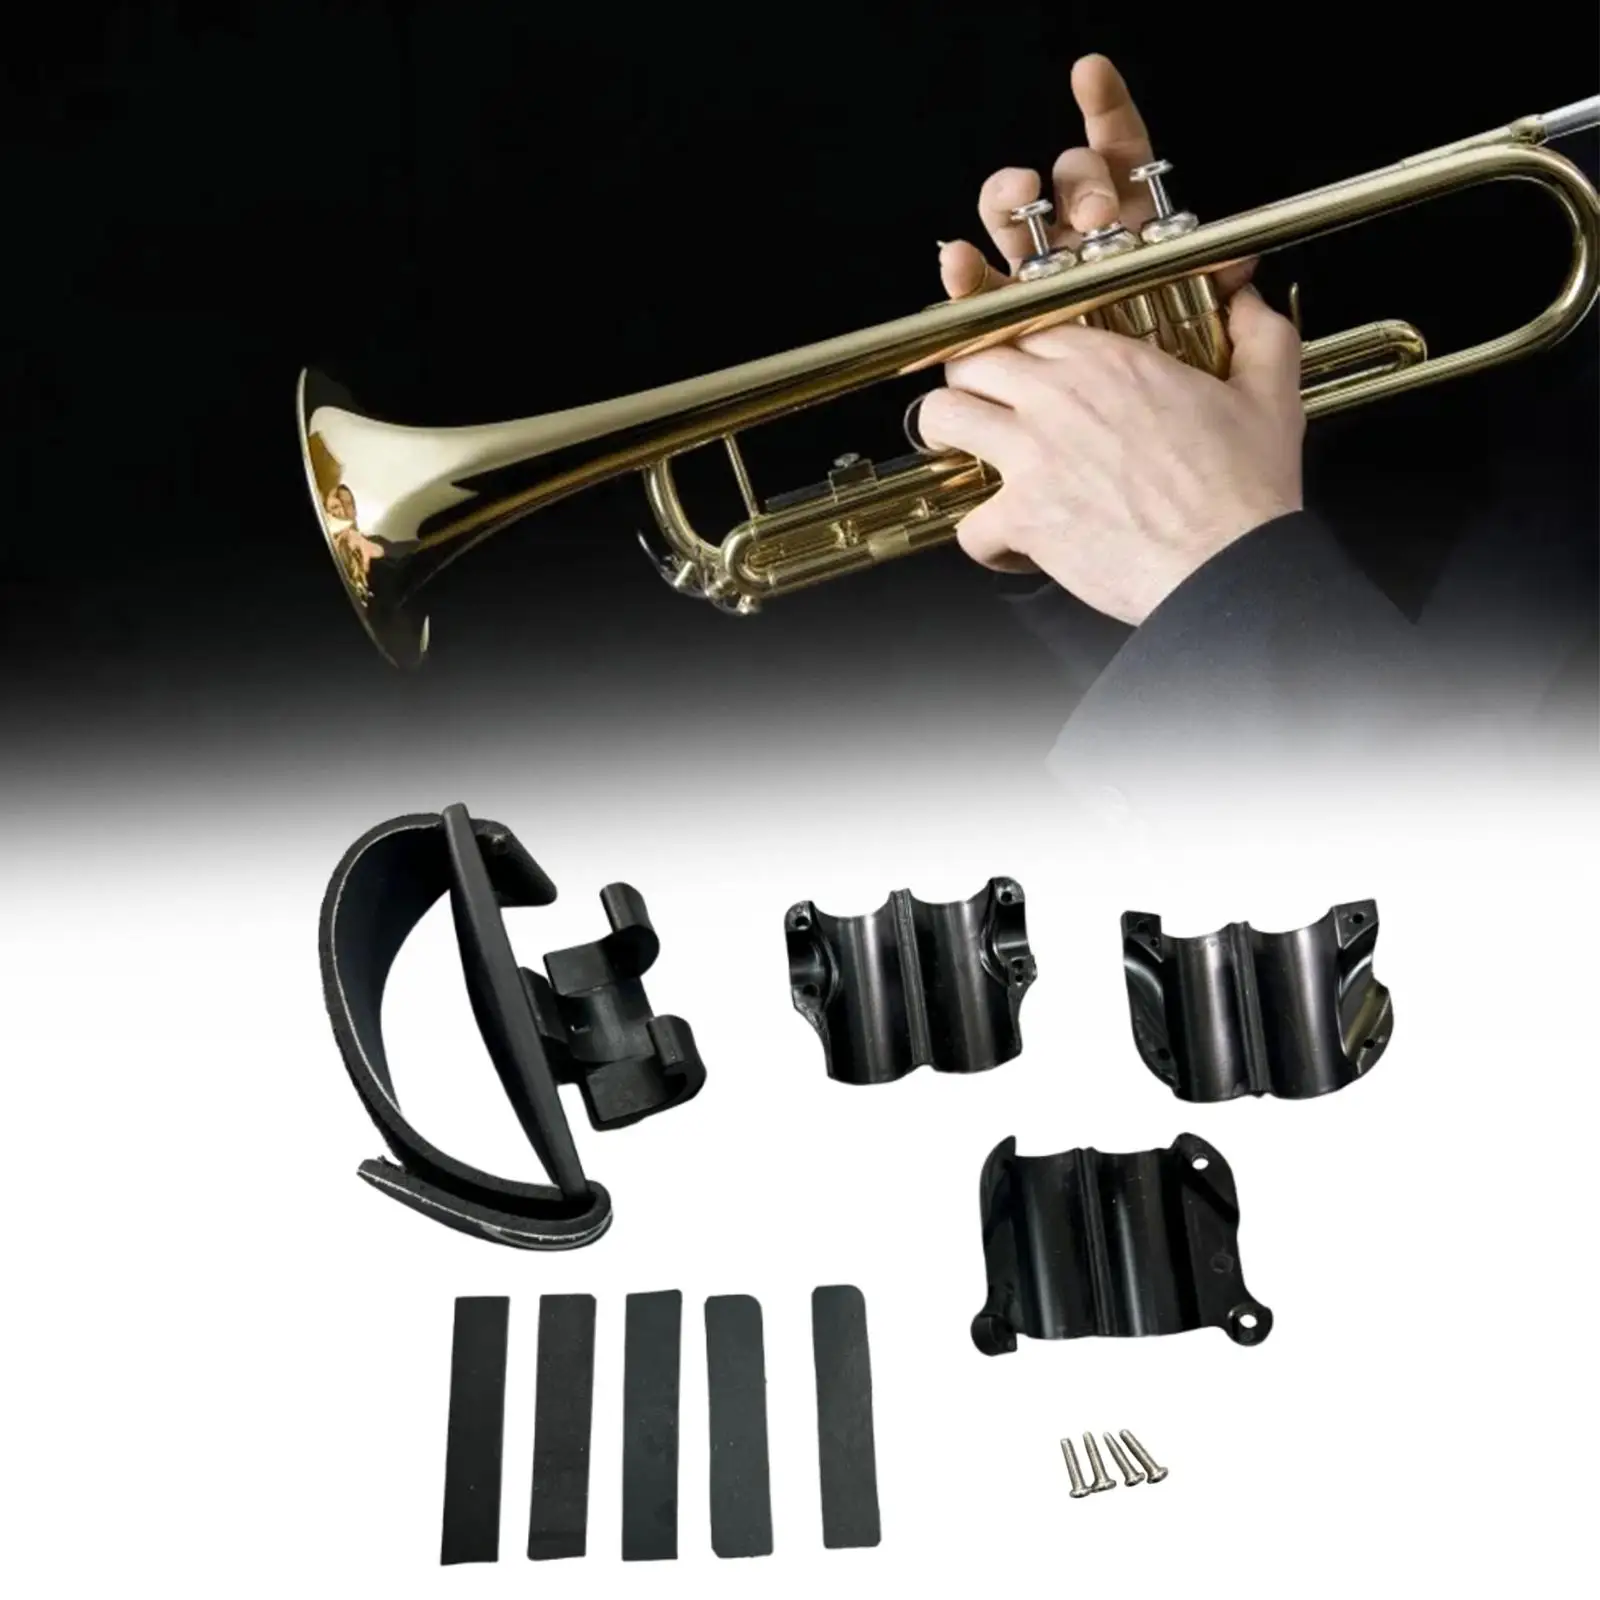 Trombone Grip Comfortable Universal Maintain A Proper Playing Position Trombone Cleaning Care with Screws and Straps Black Wraps